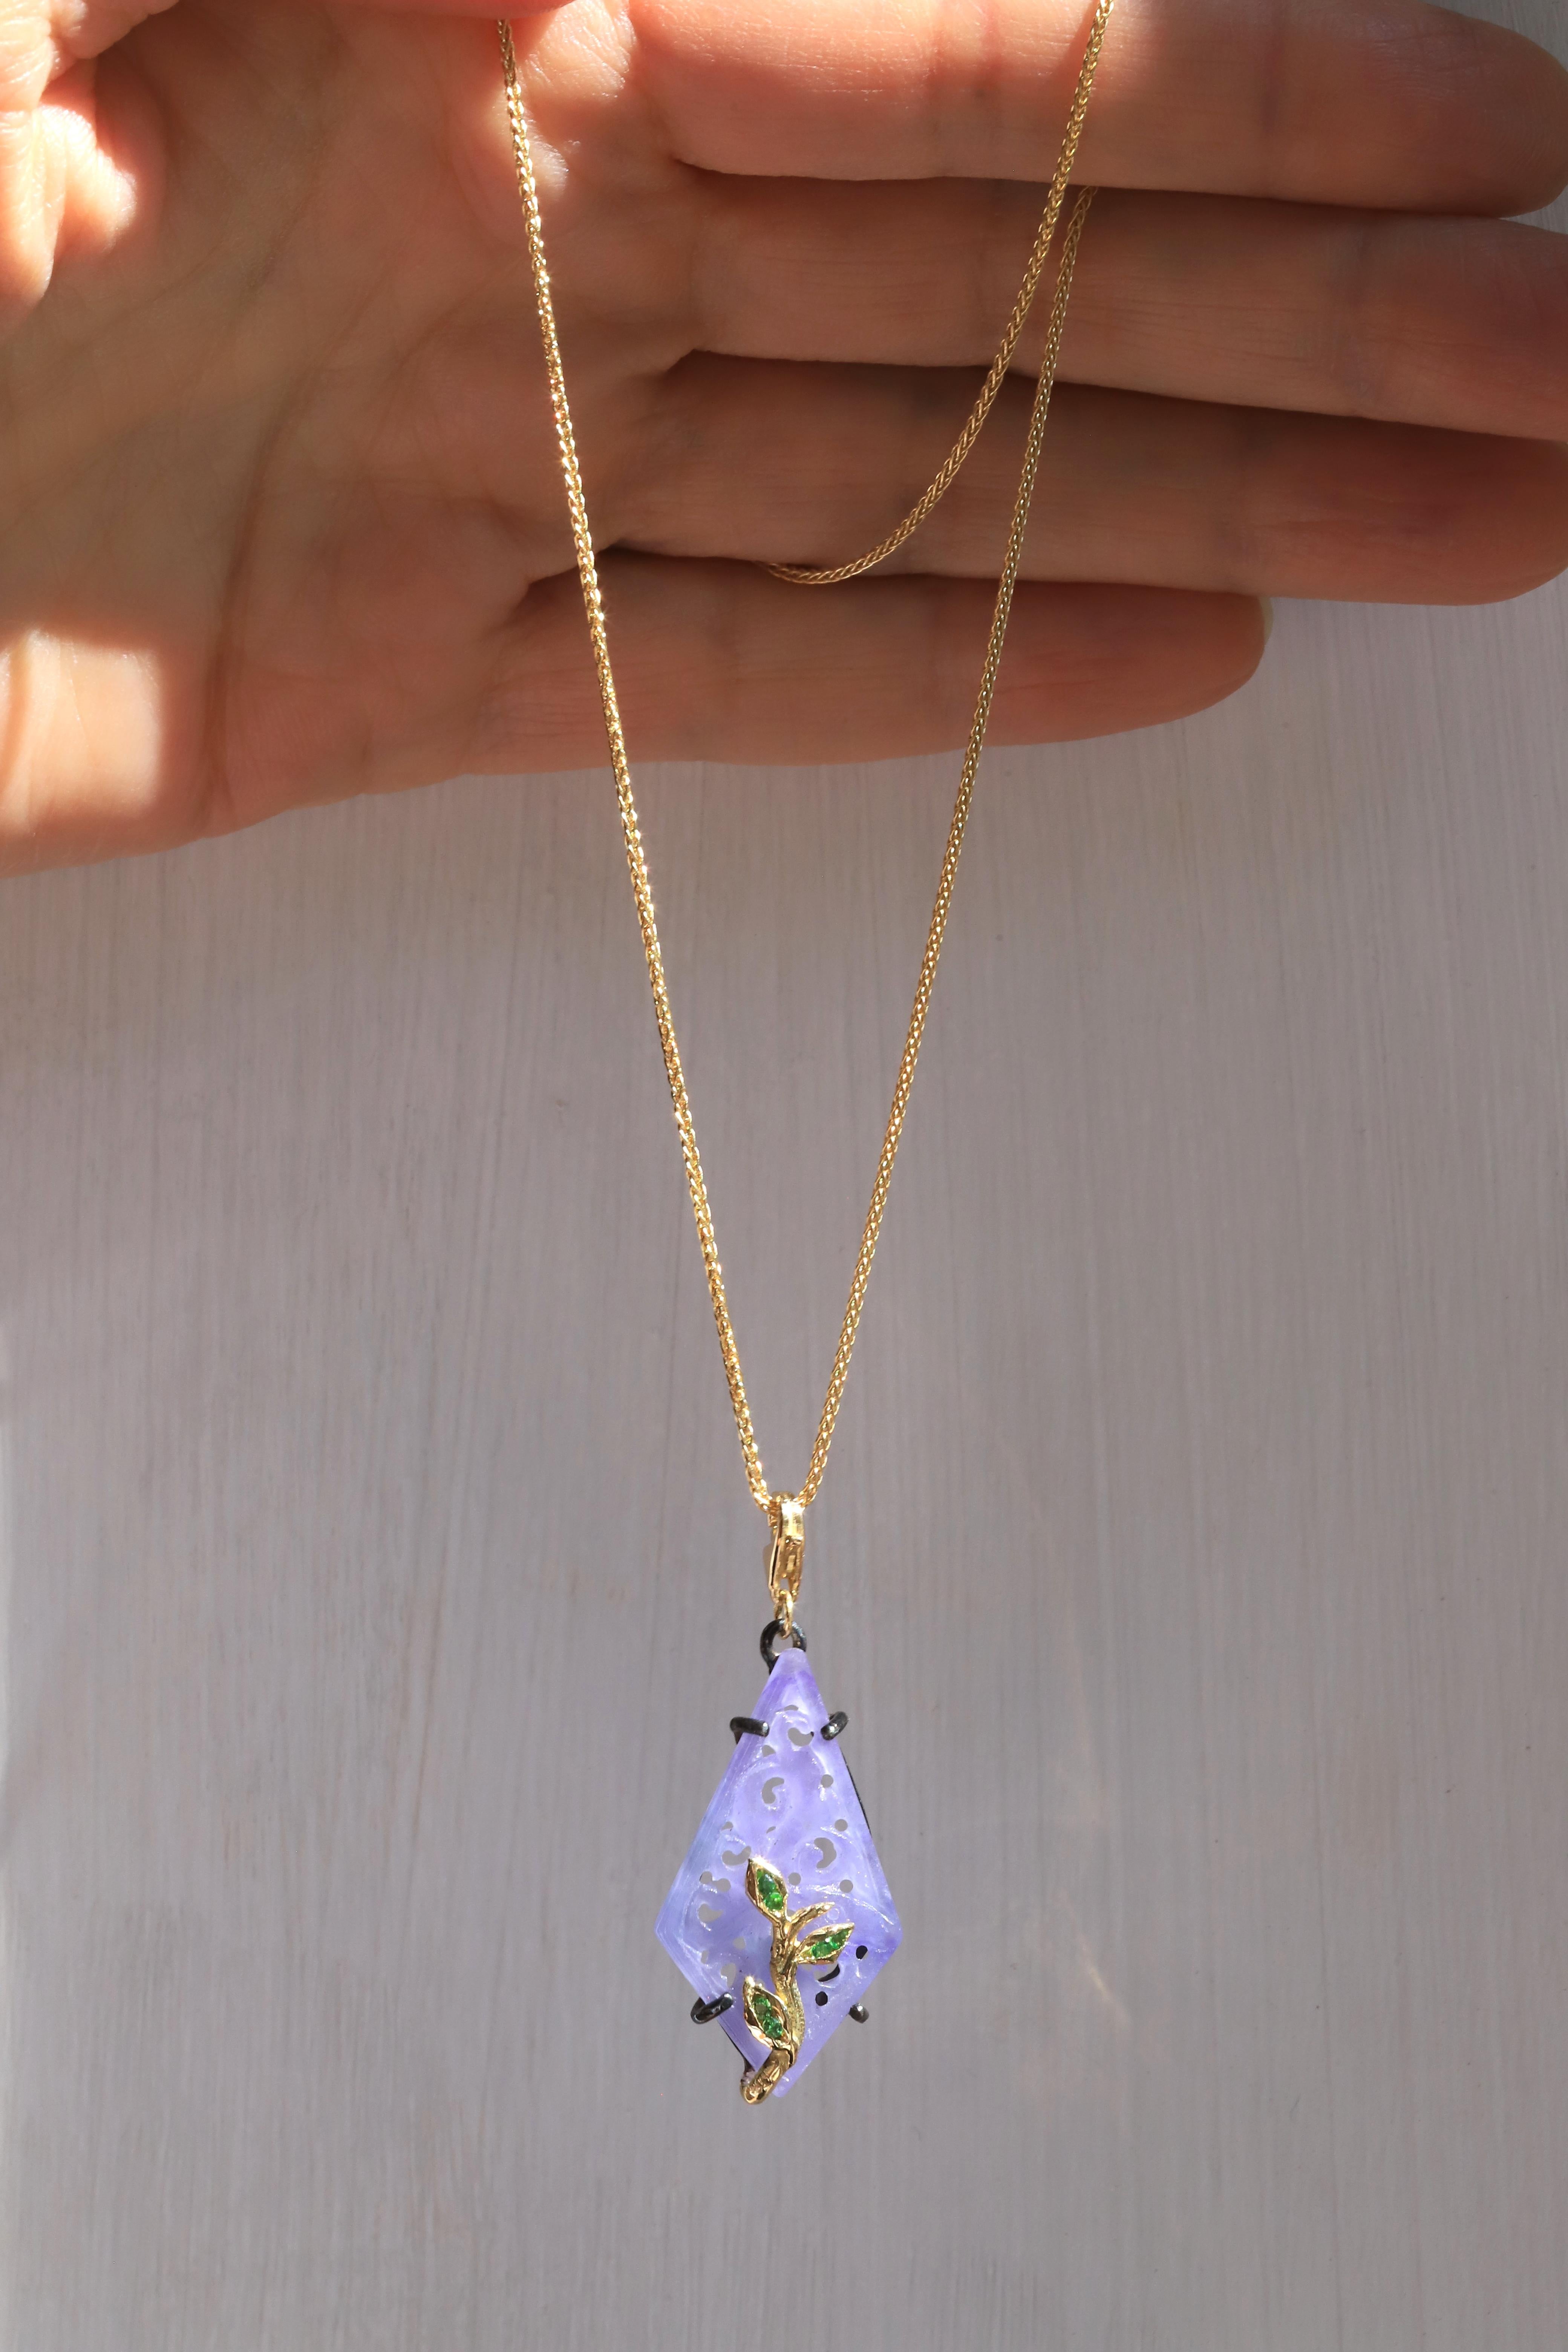 Brilliant Cut Purple Jade Charm and 18 K Yellow Gold Chain Art Deco Style Pendant Necklace For Sale